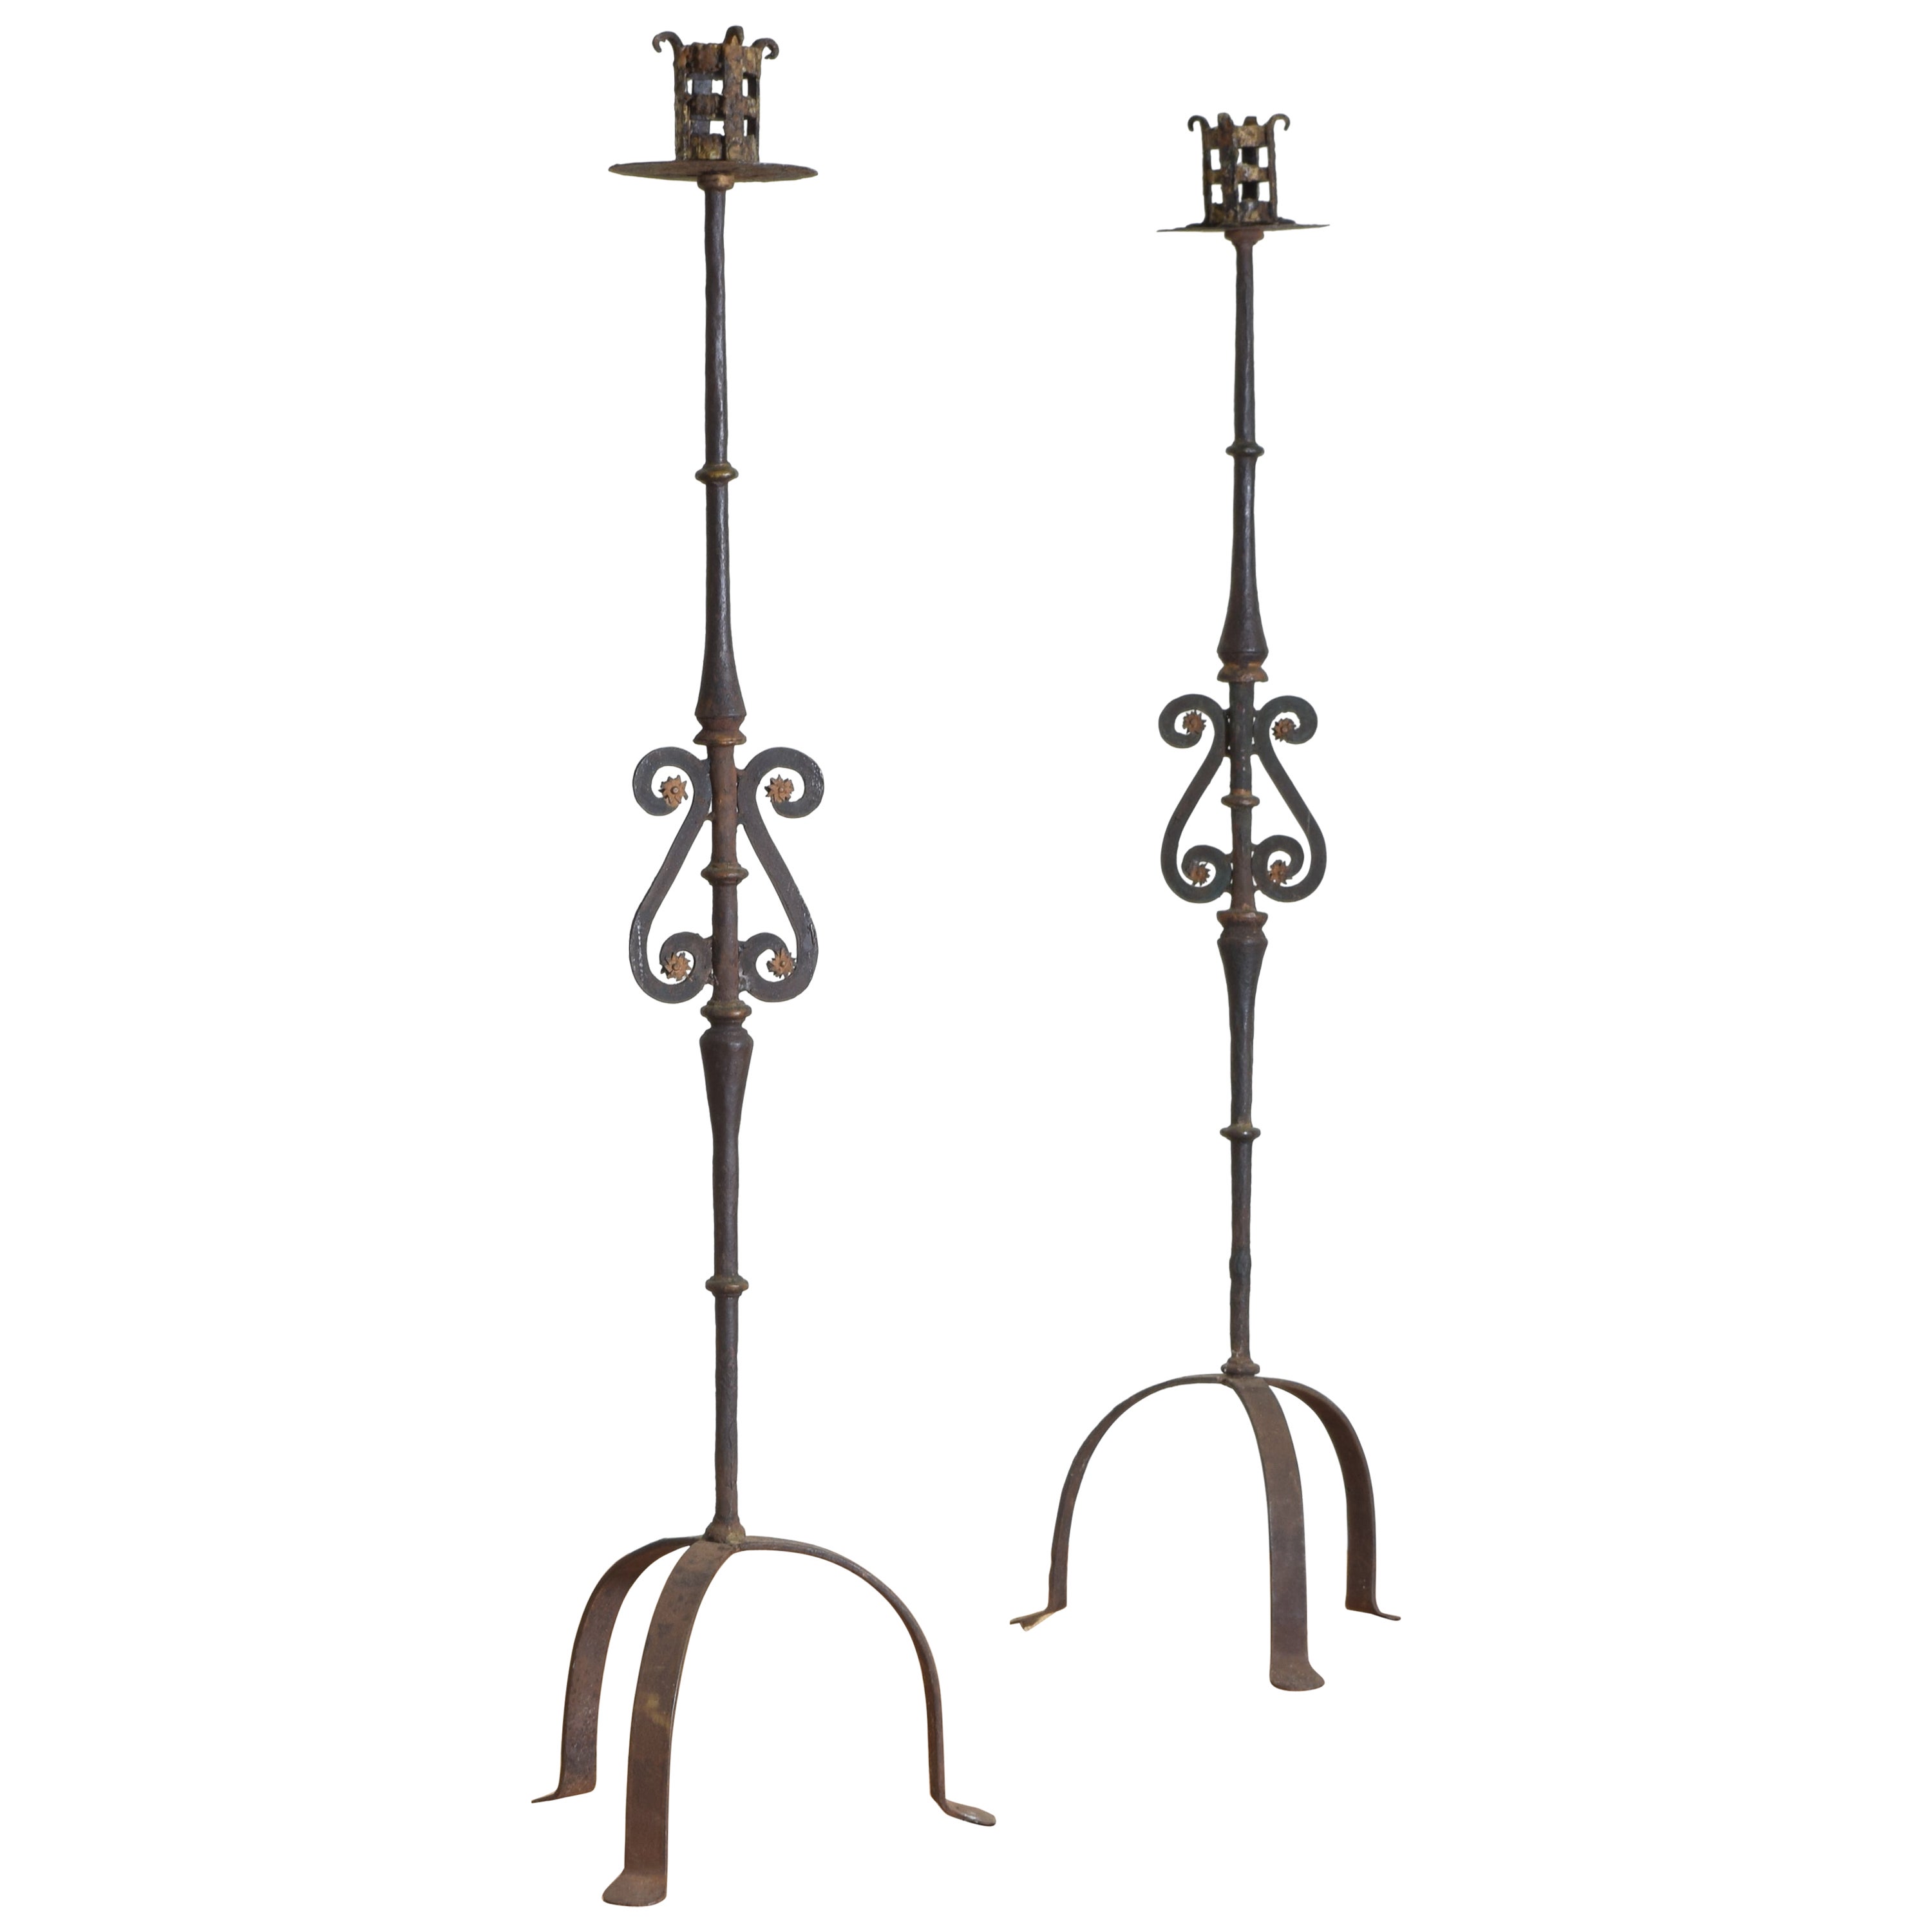 Italian Baroque Style Pair of Wrought Iron Torcheres, 19th C.